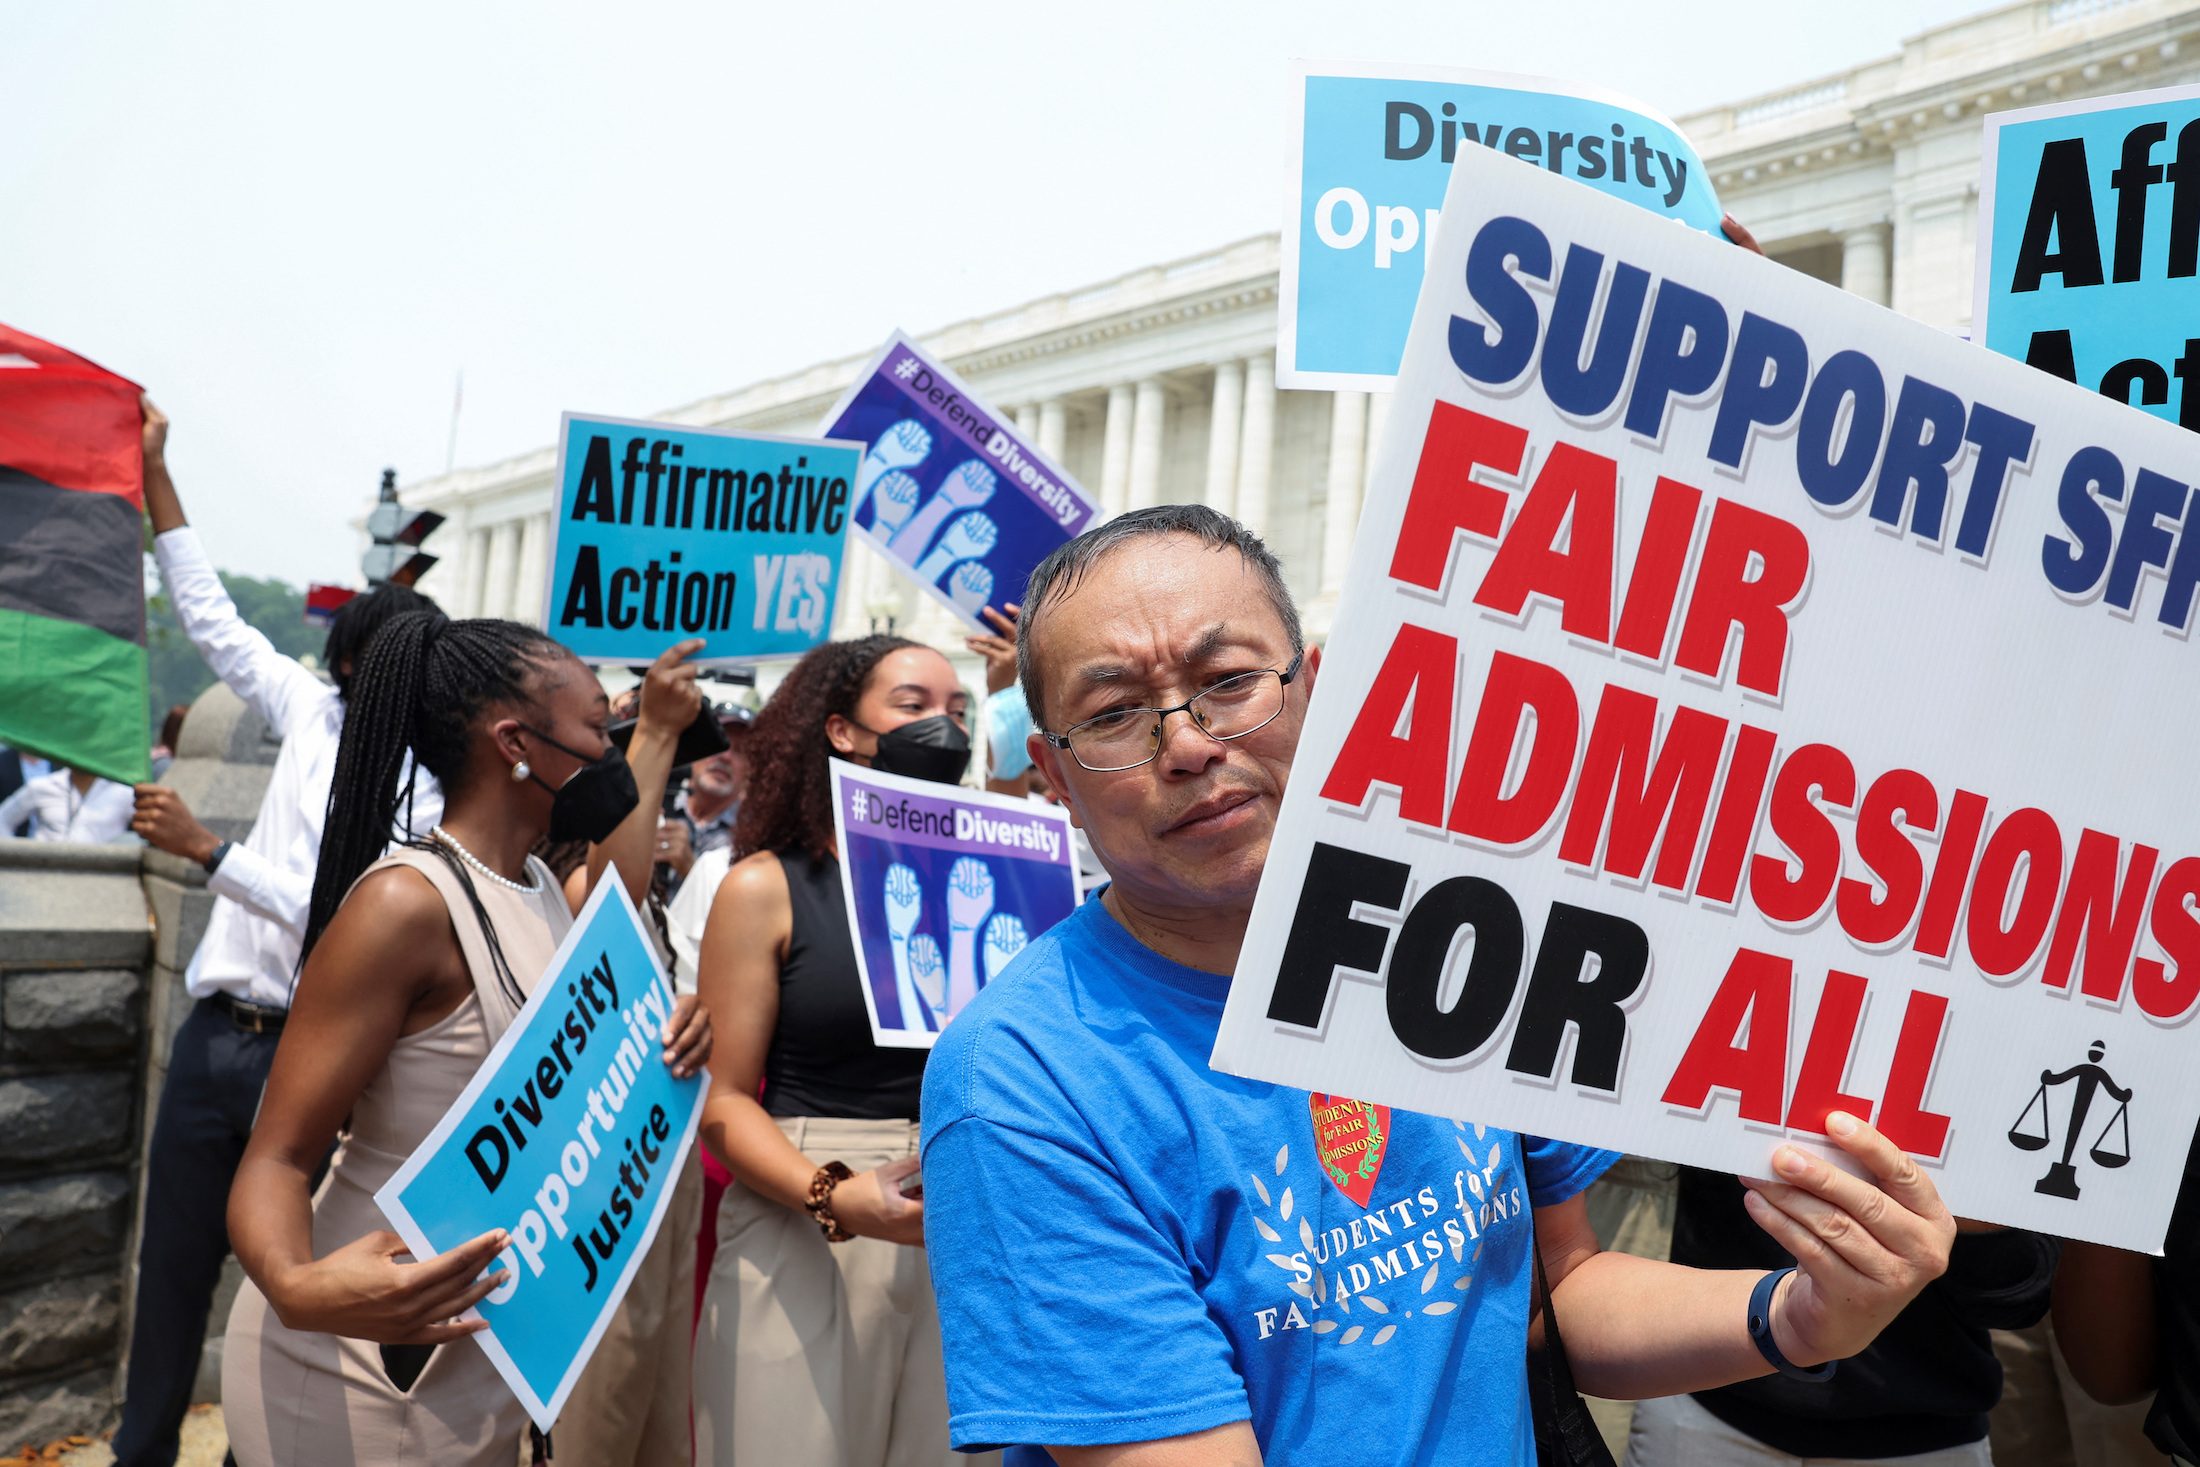 US Supreme Court rejects affirmative action in university admissions